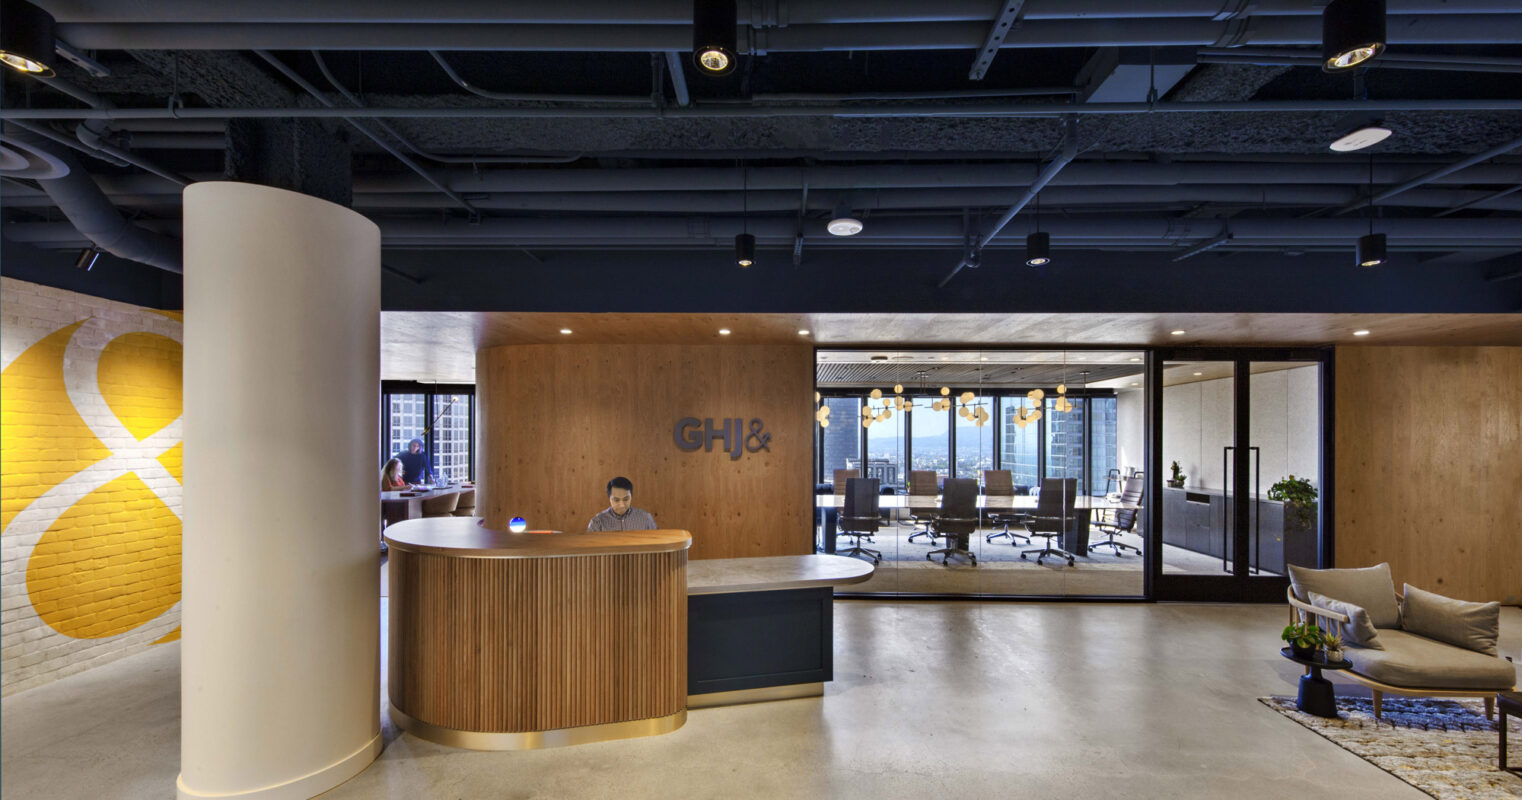 Modern office reception area blending organic and industrial motifs, with a curved wood-paneled desk, sleek pendant lighting, exposed ceiling features, and a monogram logo accent wall. Brickwork adds texture while the adjacent conference room showcases sleek, transparent partitions.